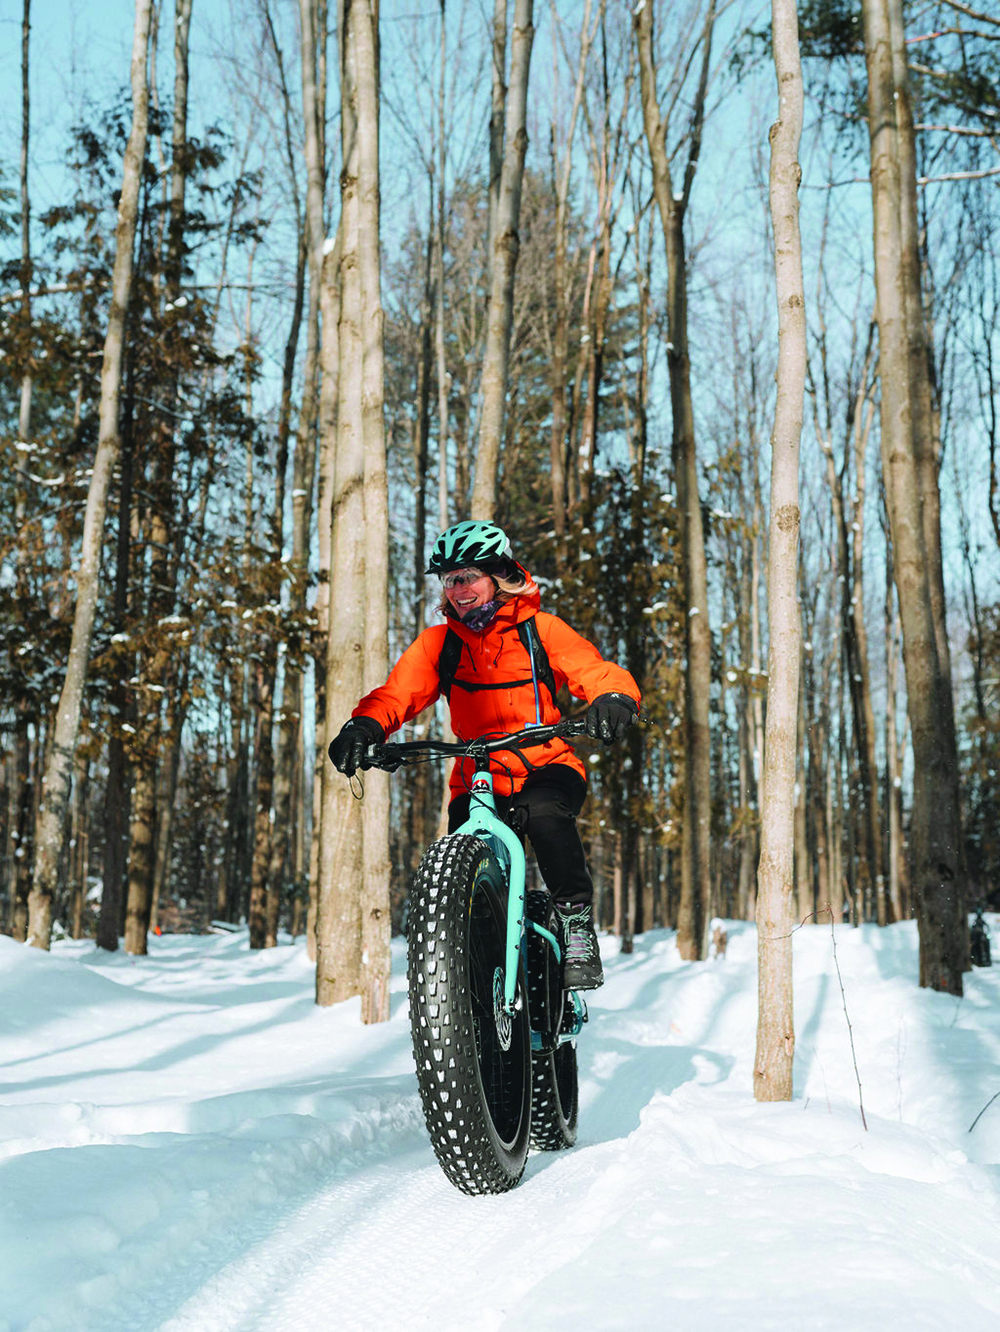 Fat biking is hugely popular at both Bromont and Sutton.